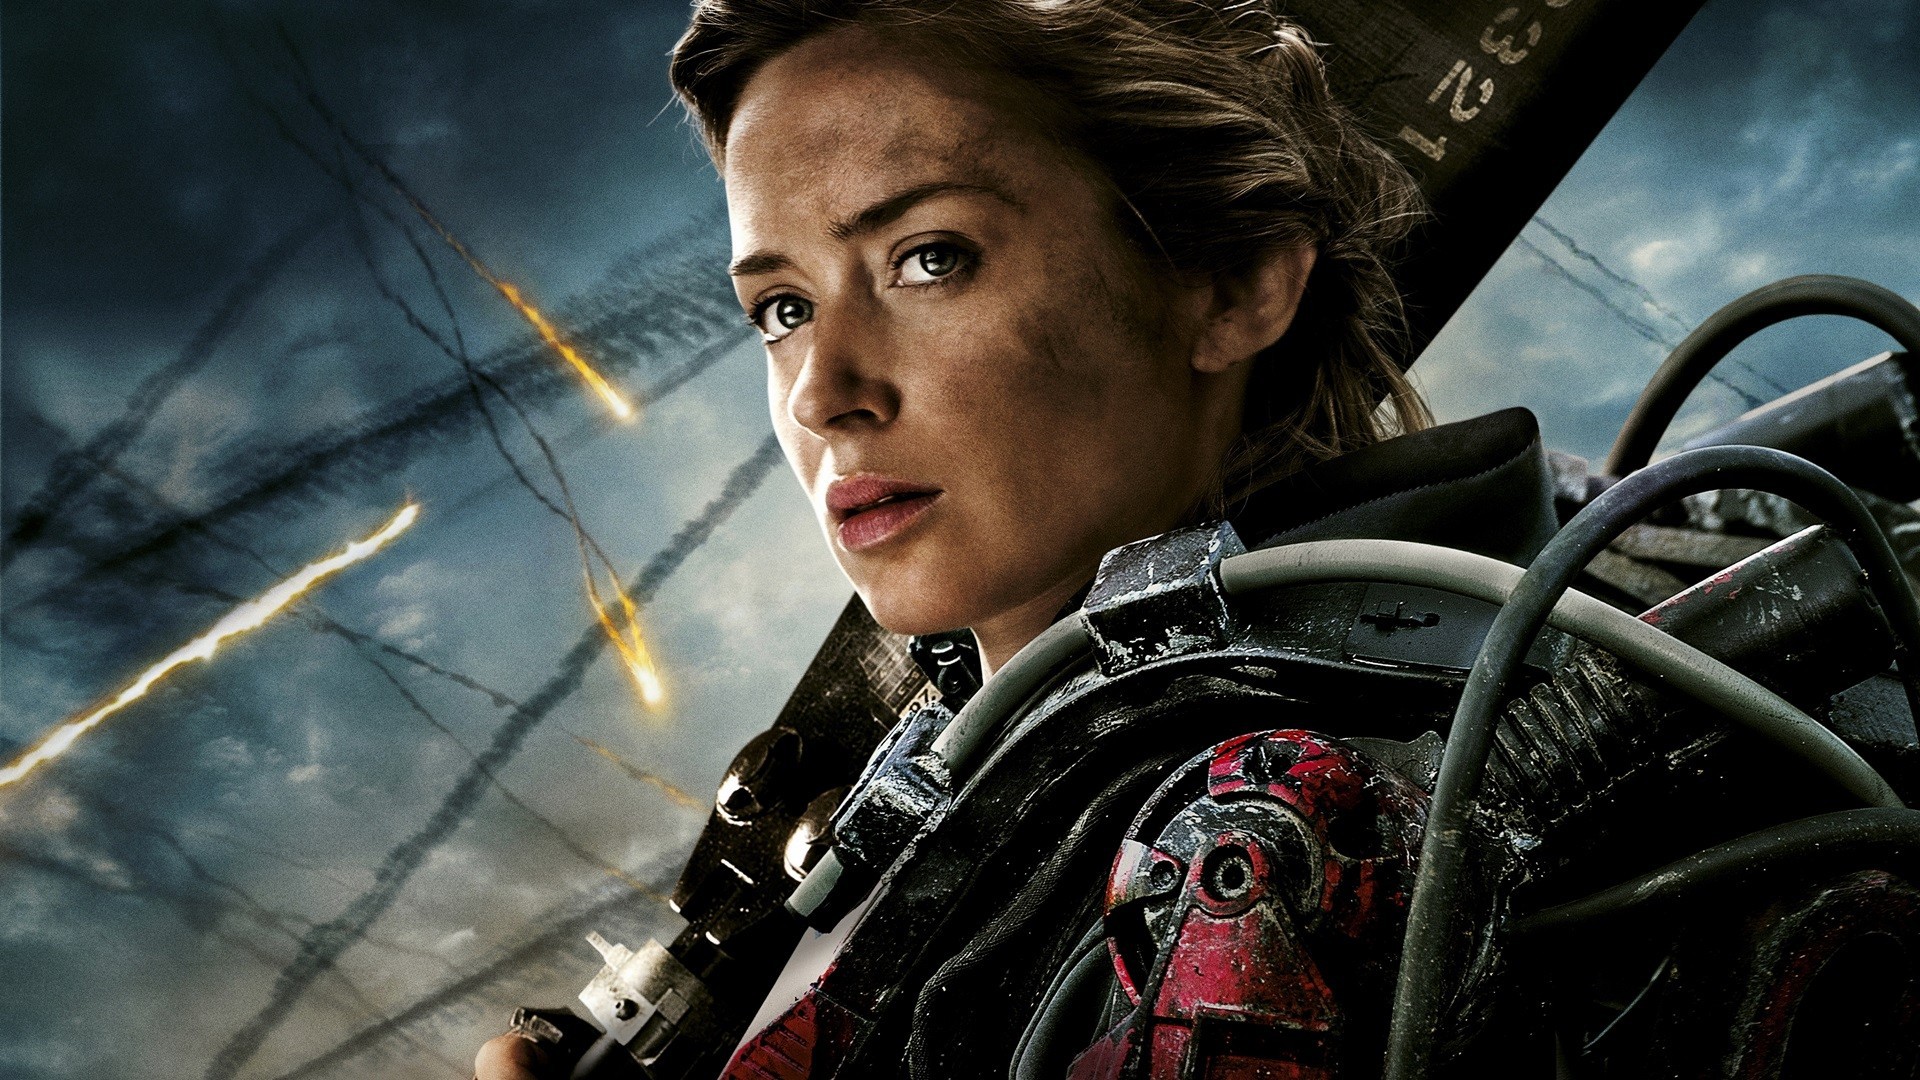 Movies_Girl_soldiers_from_the_movie_Edge_of_Tomorrow_108030_.jpg